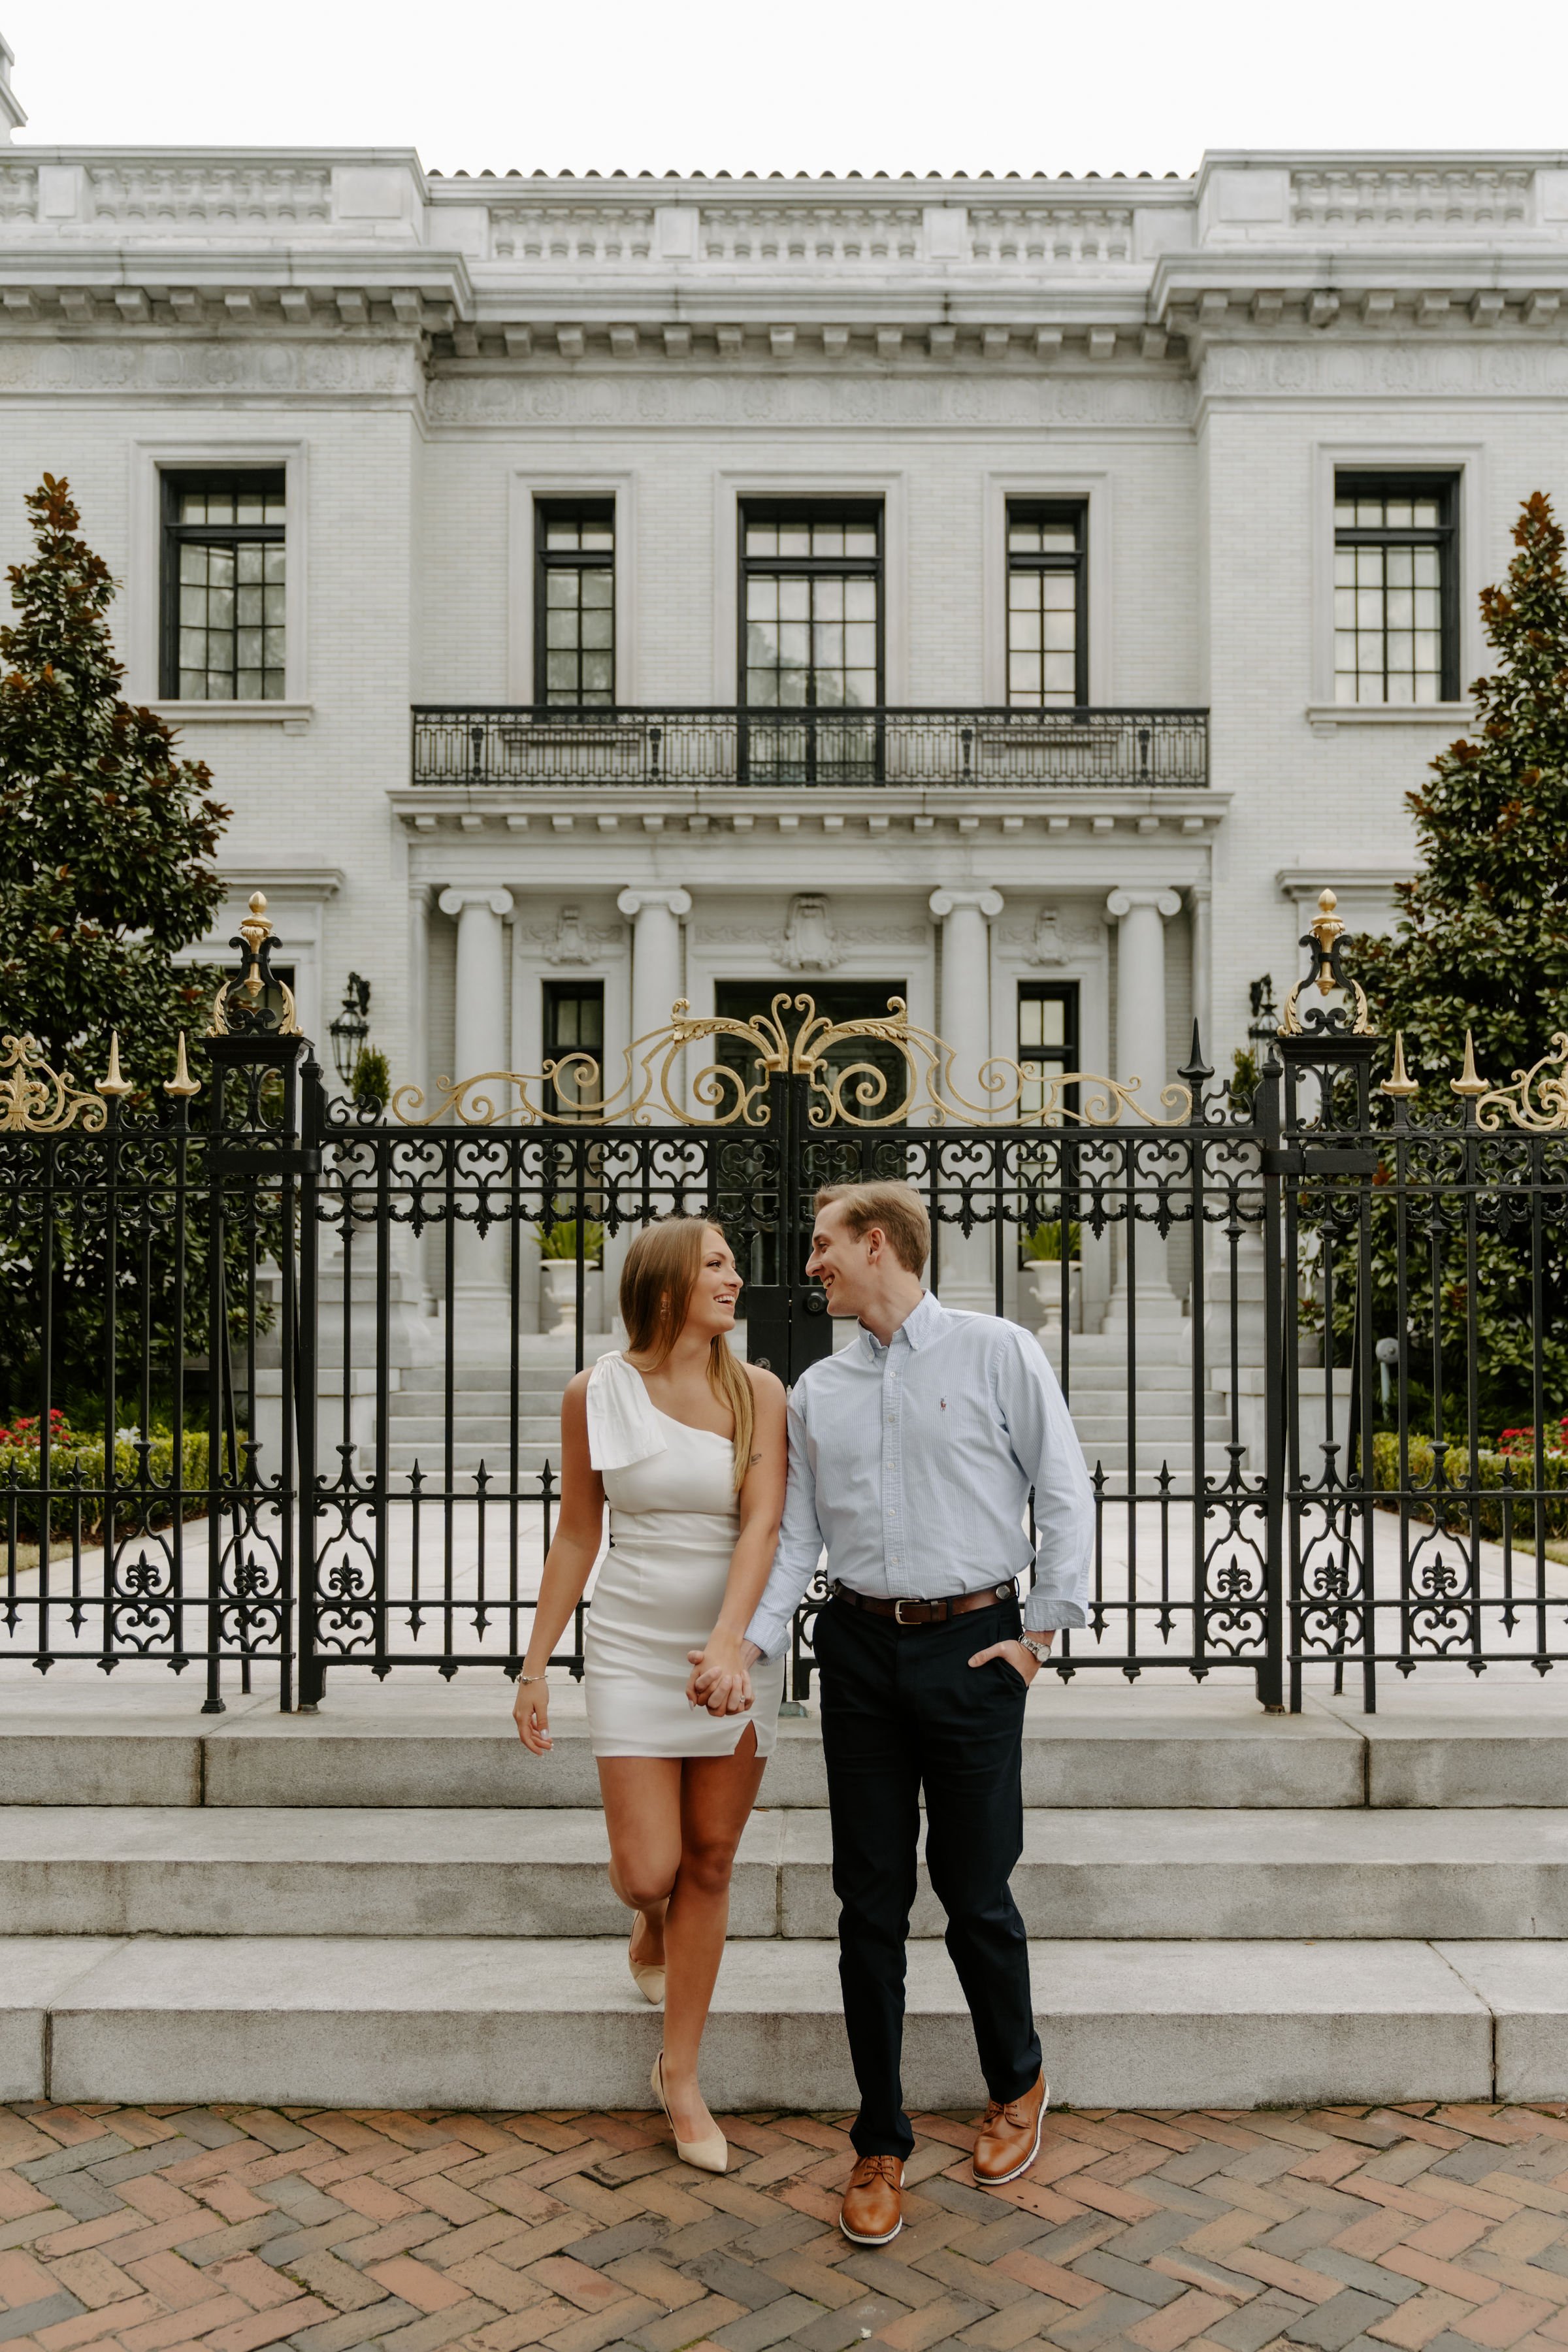 How To Make The Most Of Your Engagement Session | Georgia Wedding Photographer15.jpg